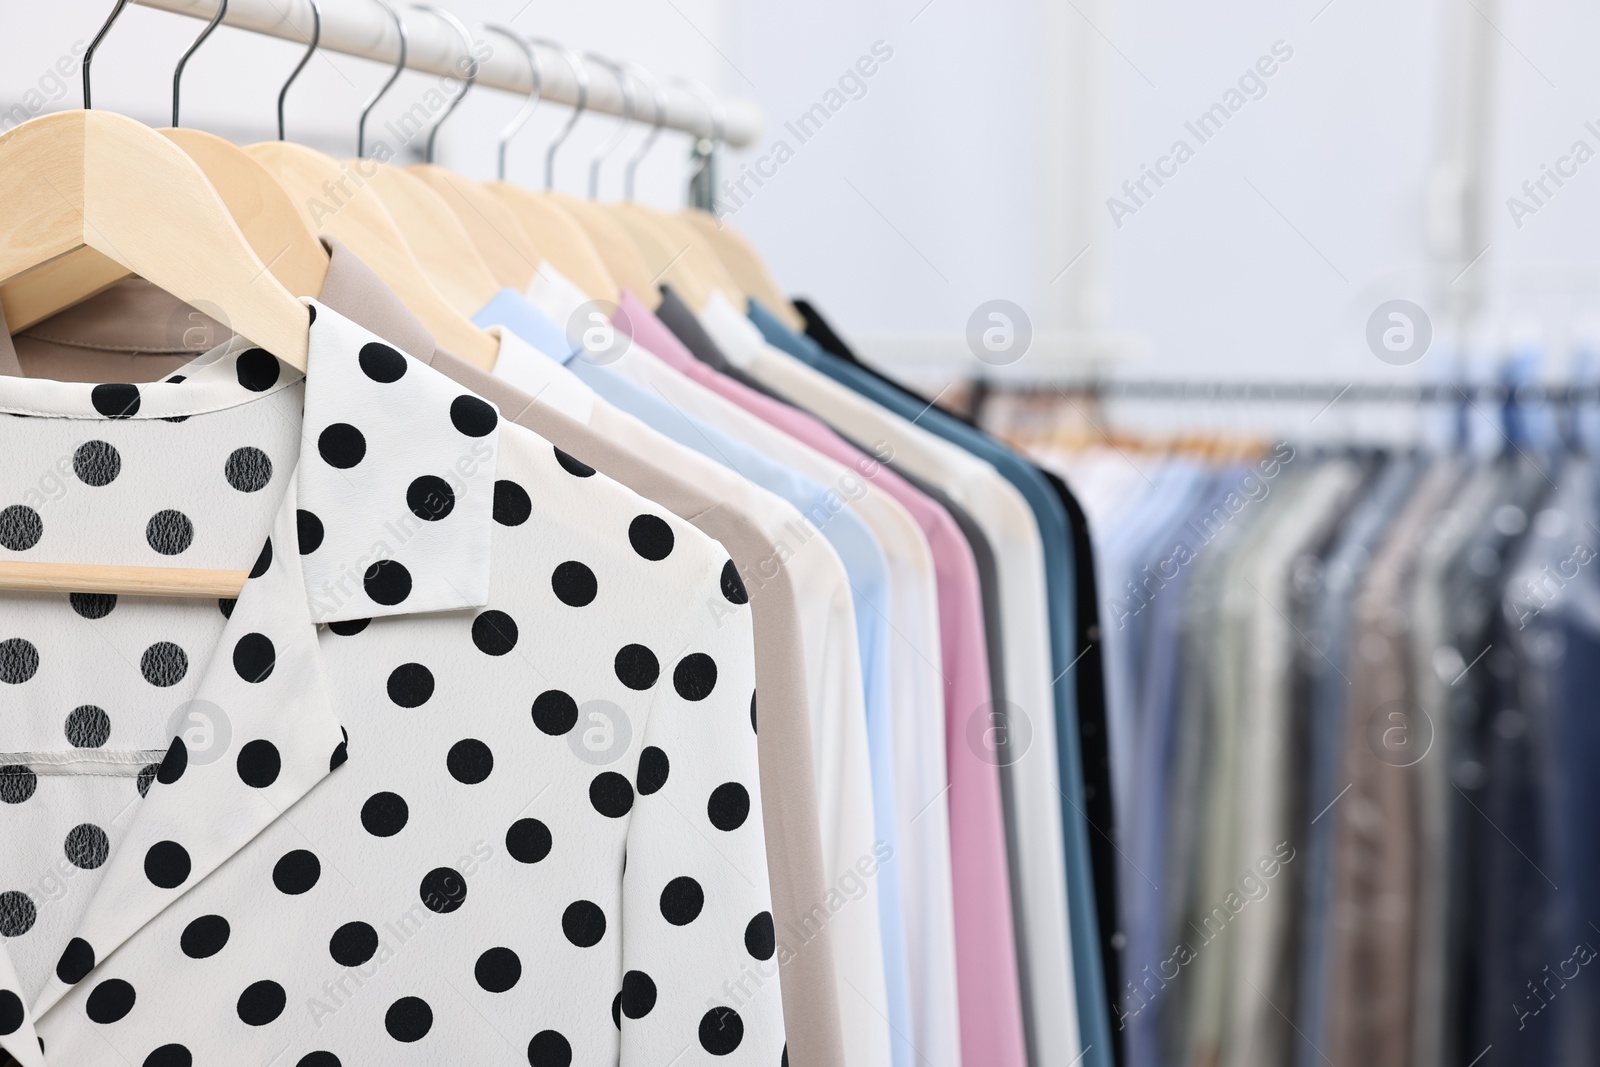 Photo of Dry-cleaning service. Many different clothes hanging on rack indoors, closeup